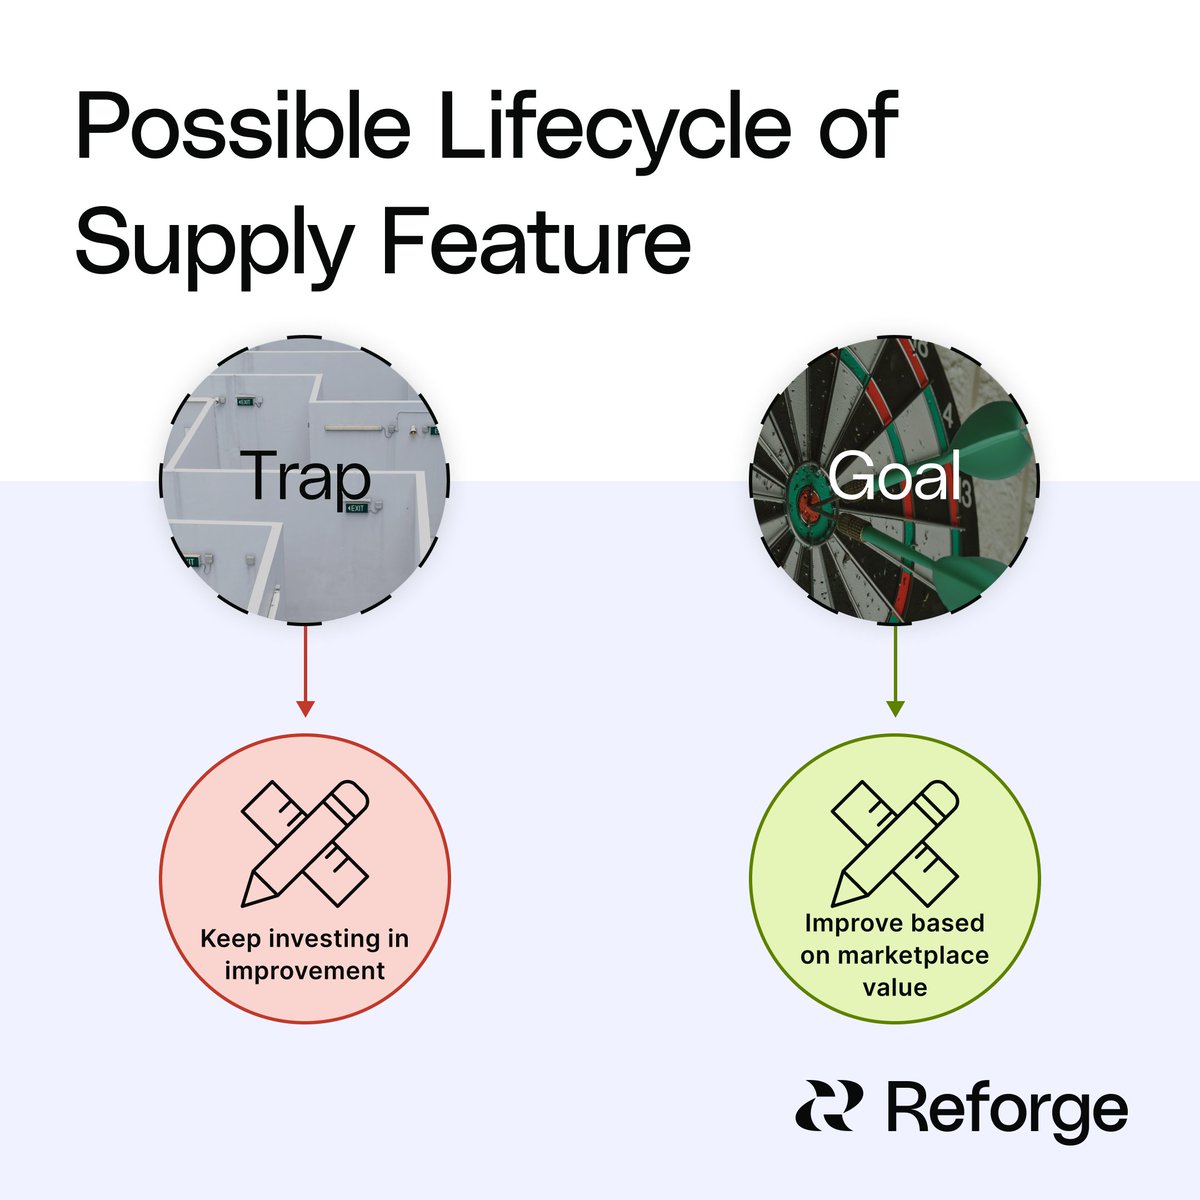 Building features to attract and retain suppliers in a marketplace can be a trap. Tie product features to marketplace value using three key principles in the guide we created with @GiladHorev. Read more here: reforge.com/previews/produ…